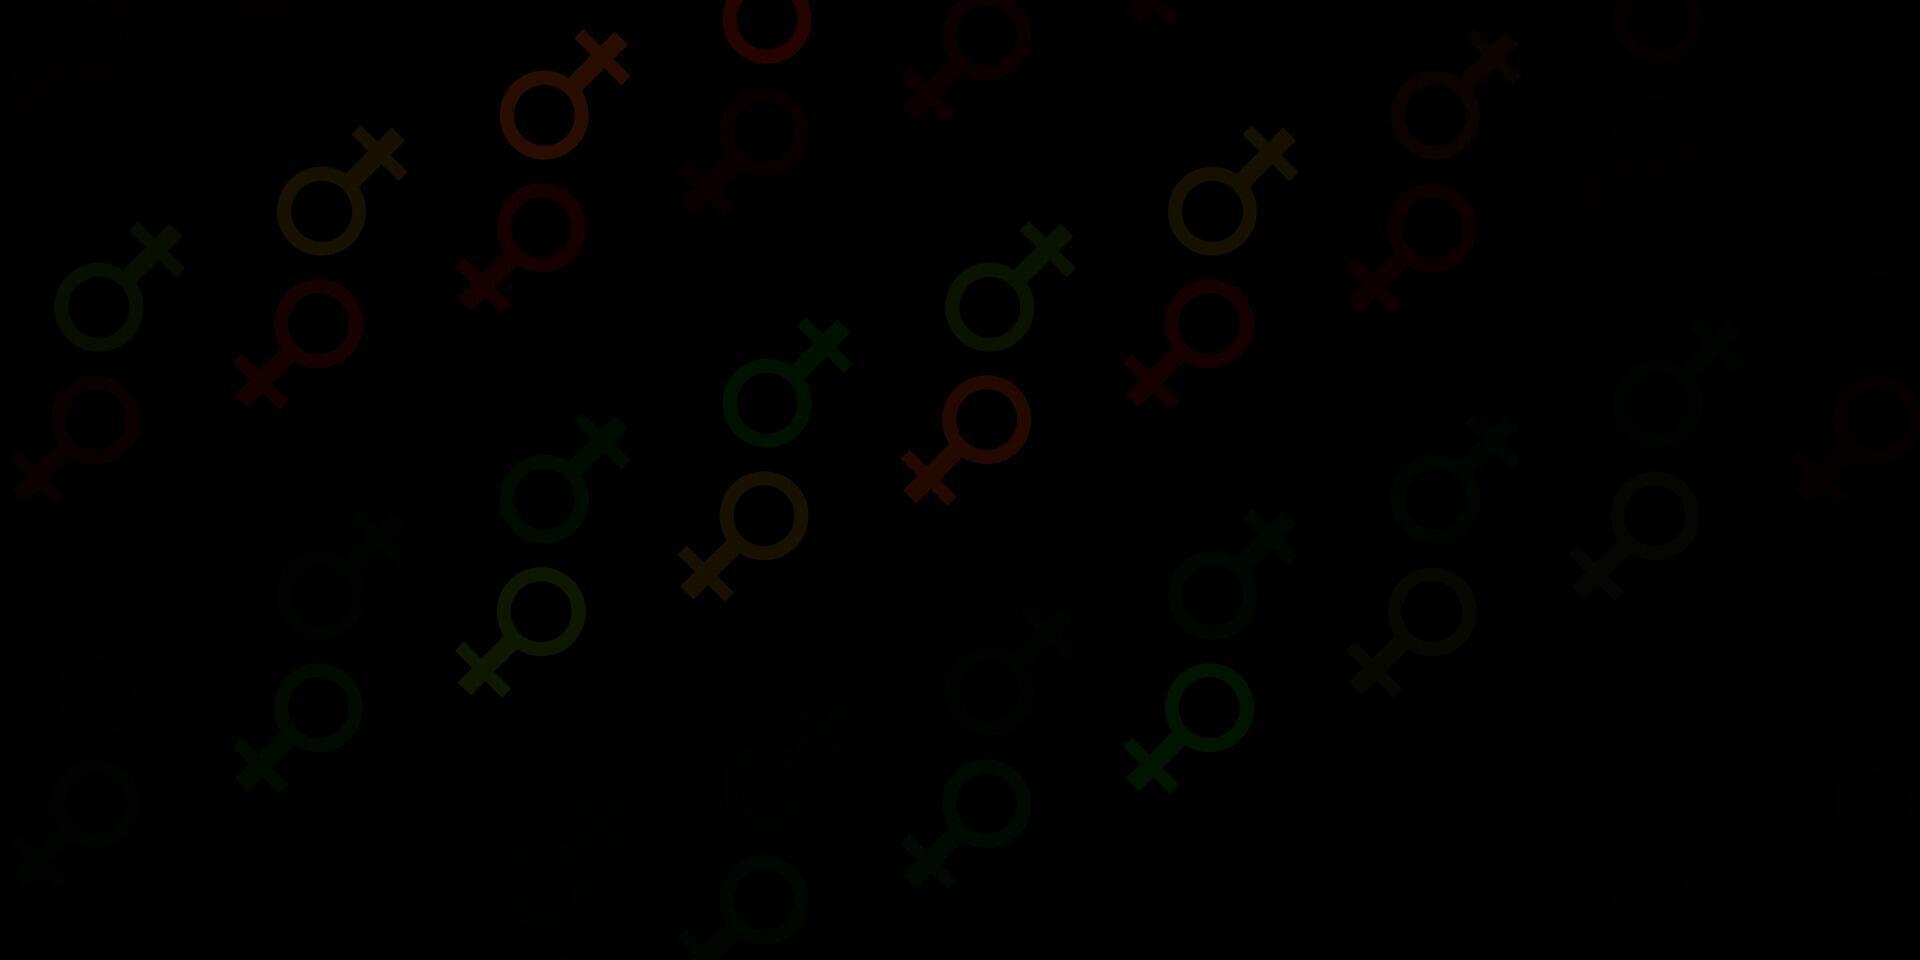 Dark Green, Red vector texture with women's rights symbols.